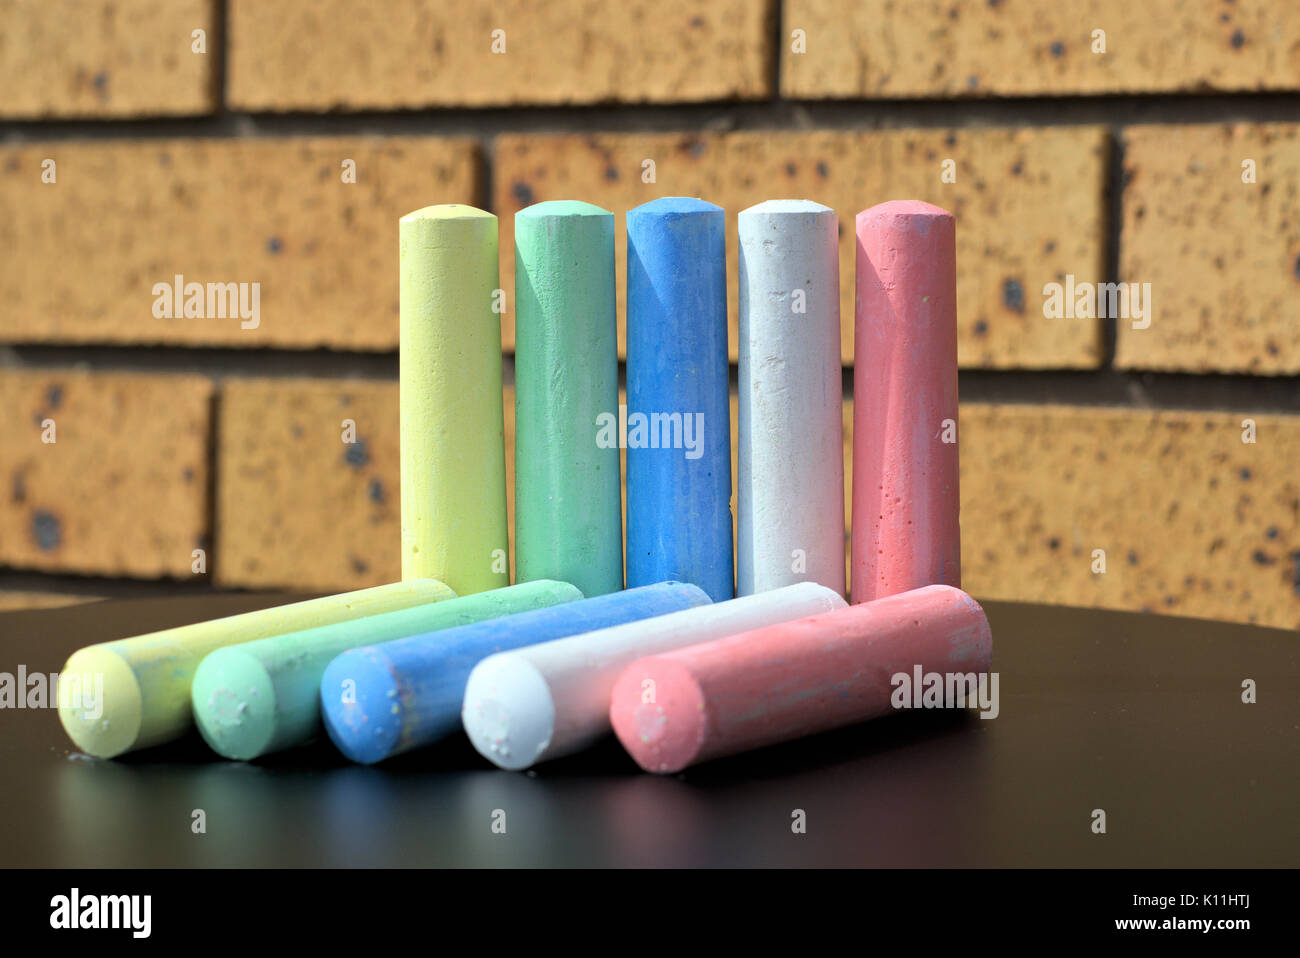 Ten chalks of five different colors on table. Concept of ten as in ten things, ten objects, ten people of different colors. Stock Photo